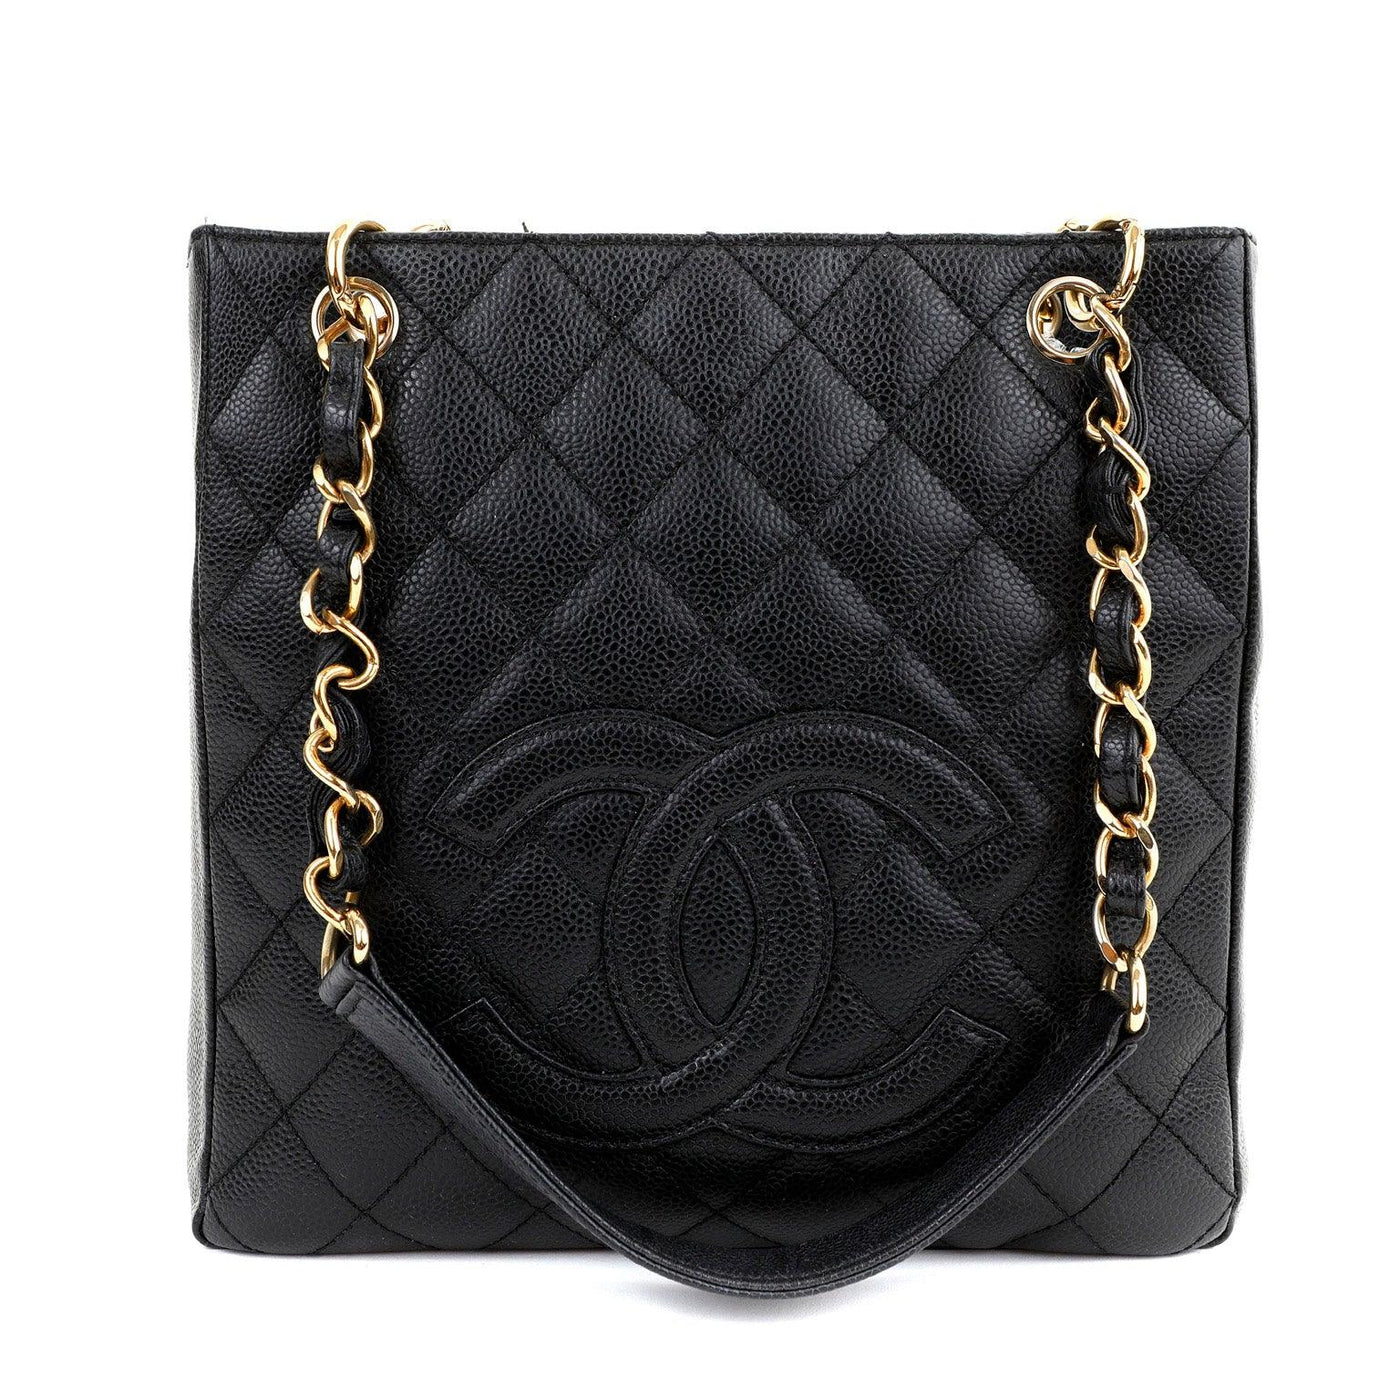 Chanel Black Caviar Petite Shopper Tote with Gold Hardware - Only Authentics